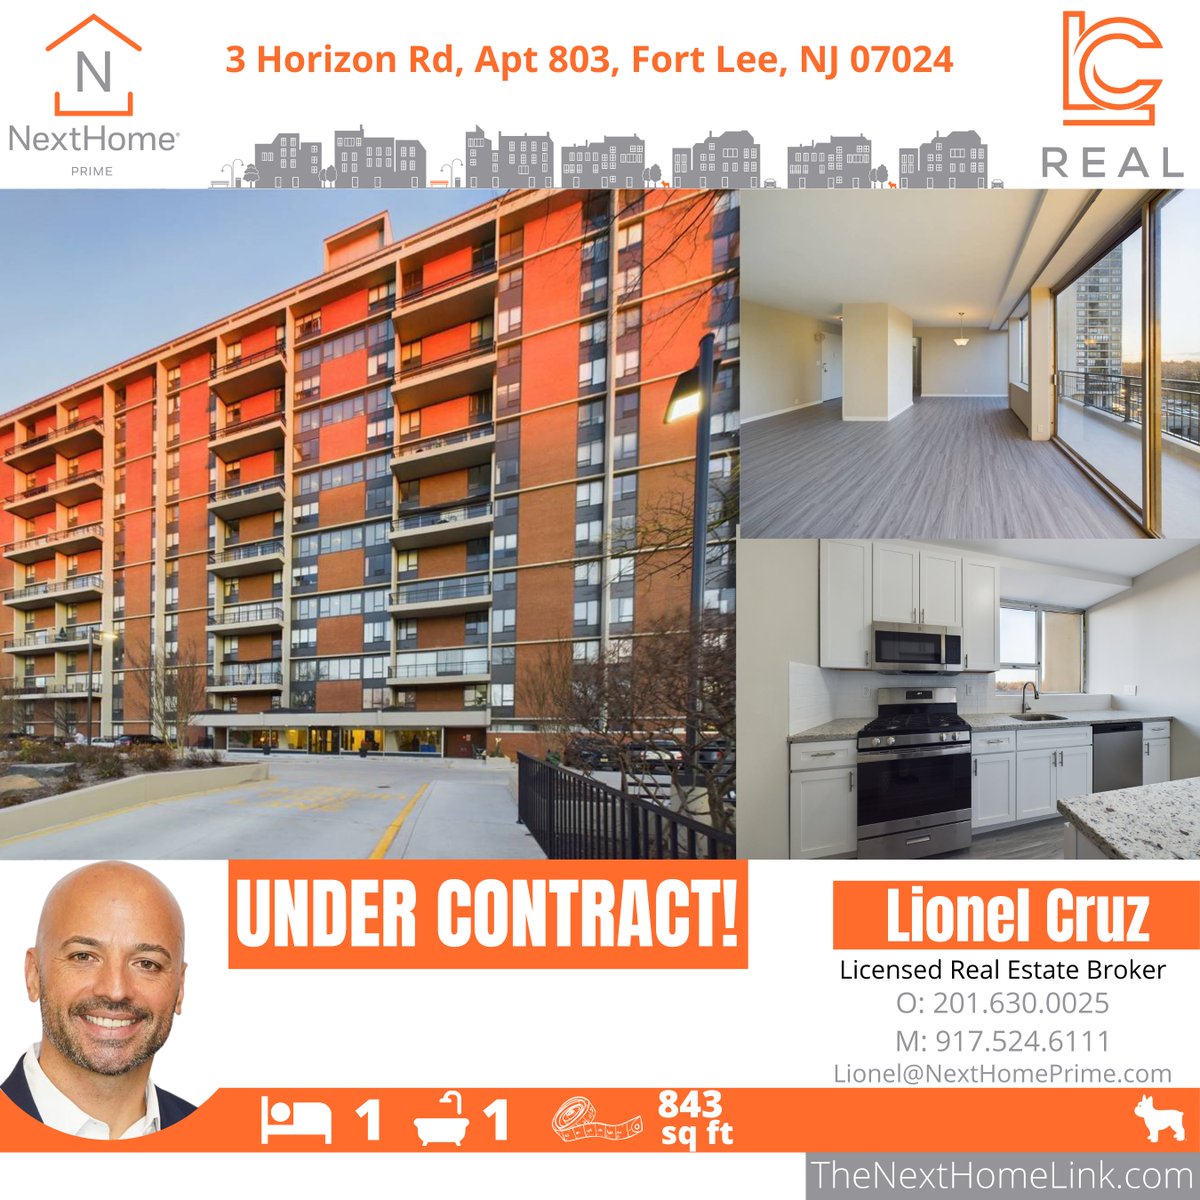 We are now UNDER CONTRACT at 3 Horizon Rd, Apt 803, Fort Lee, NJ 07024!

#NextHomePrime #NextHome #RealEstate #condo #UnderContract #RealEstateForSale #HomesForSale #LionelCruz #LCReal #NewJersey #NJ #Residential #JustListed #DreamHome #Home #NewListing #Apartments #NJApartments